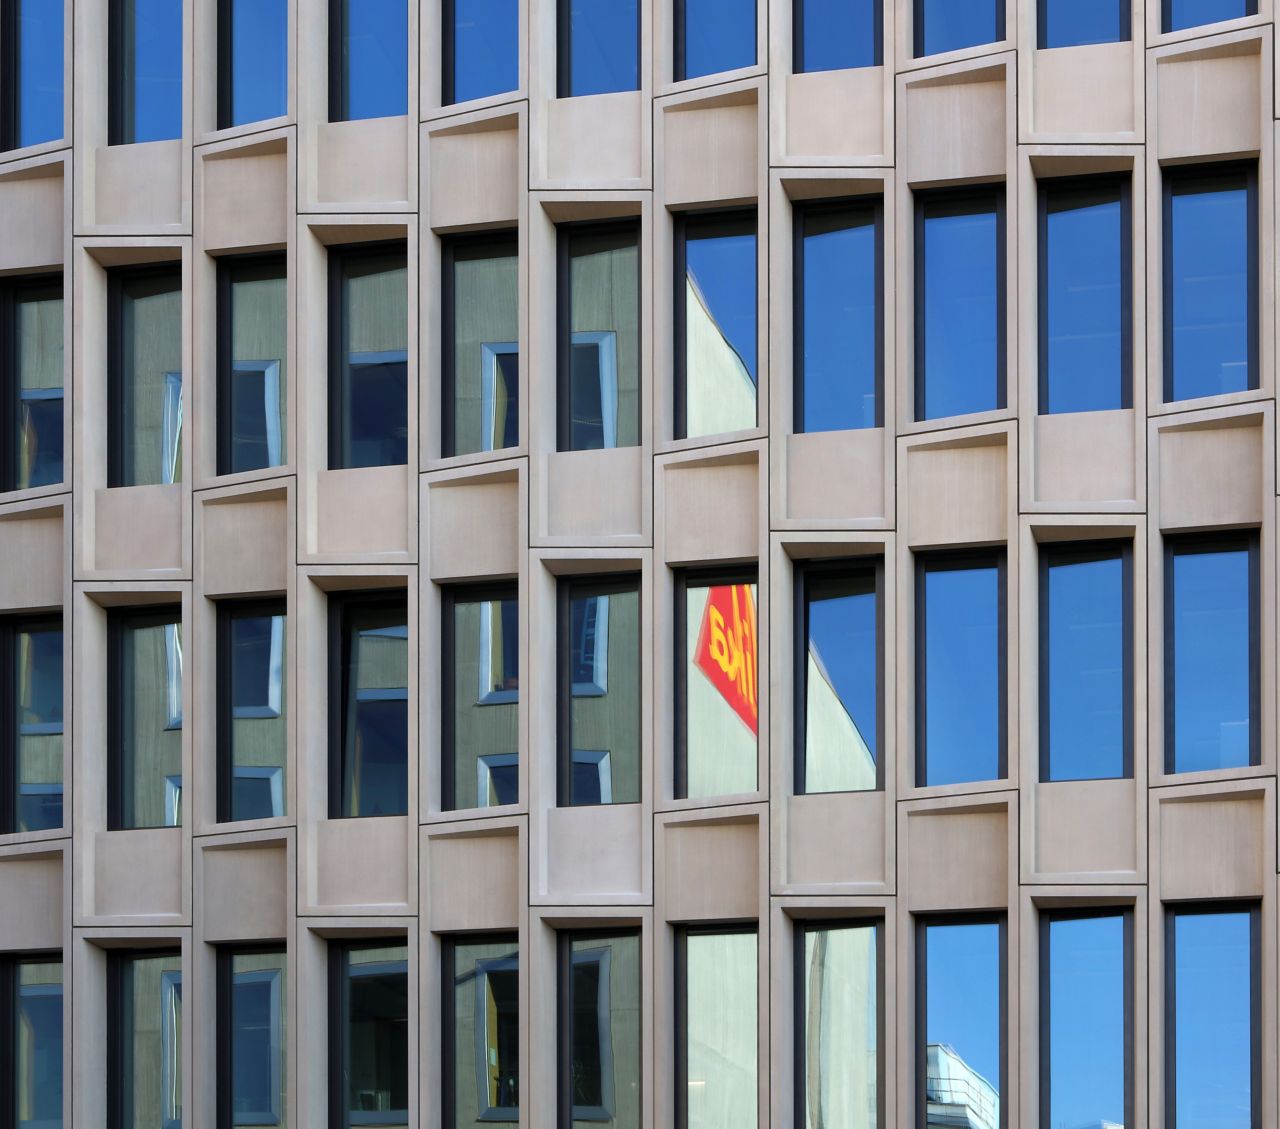 Facade of Sika office building in Zurich